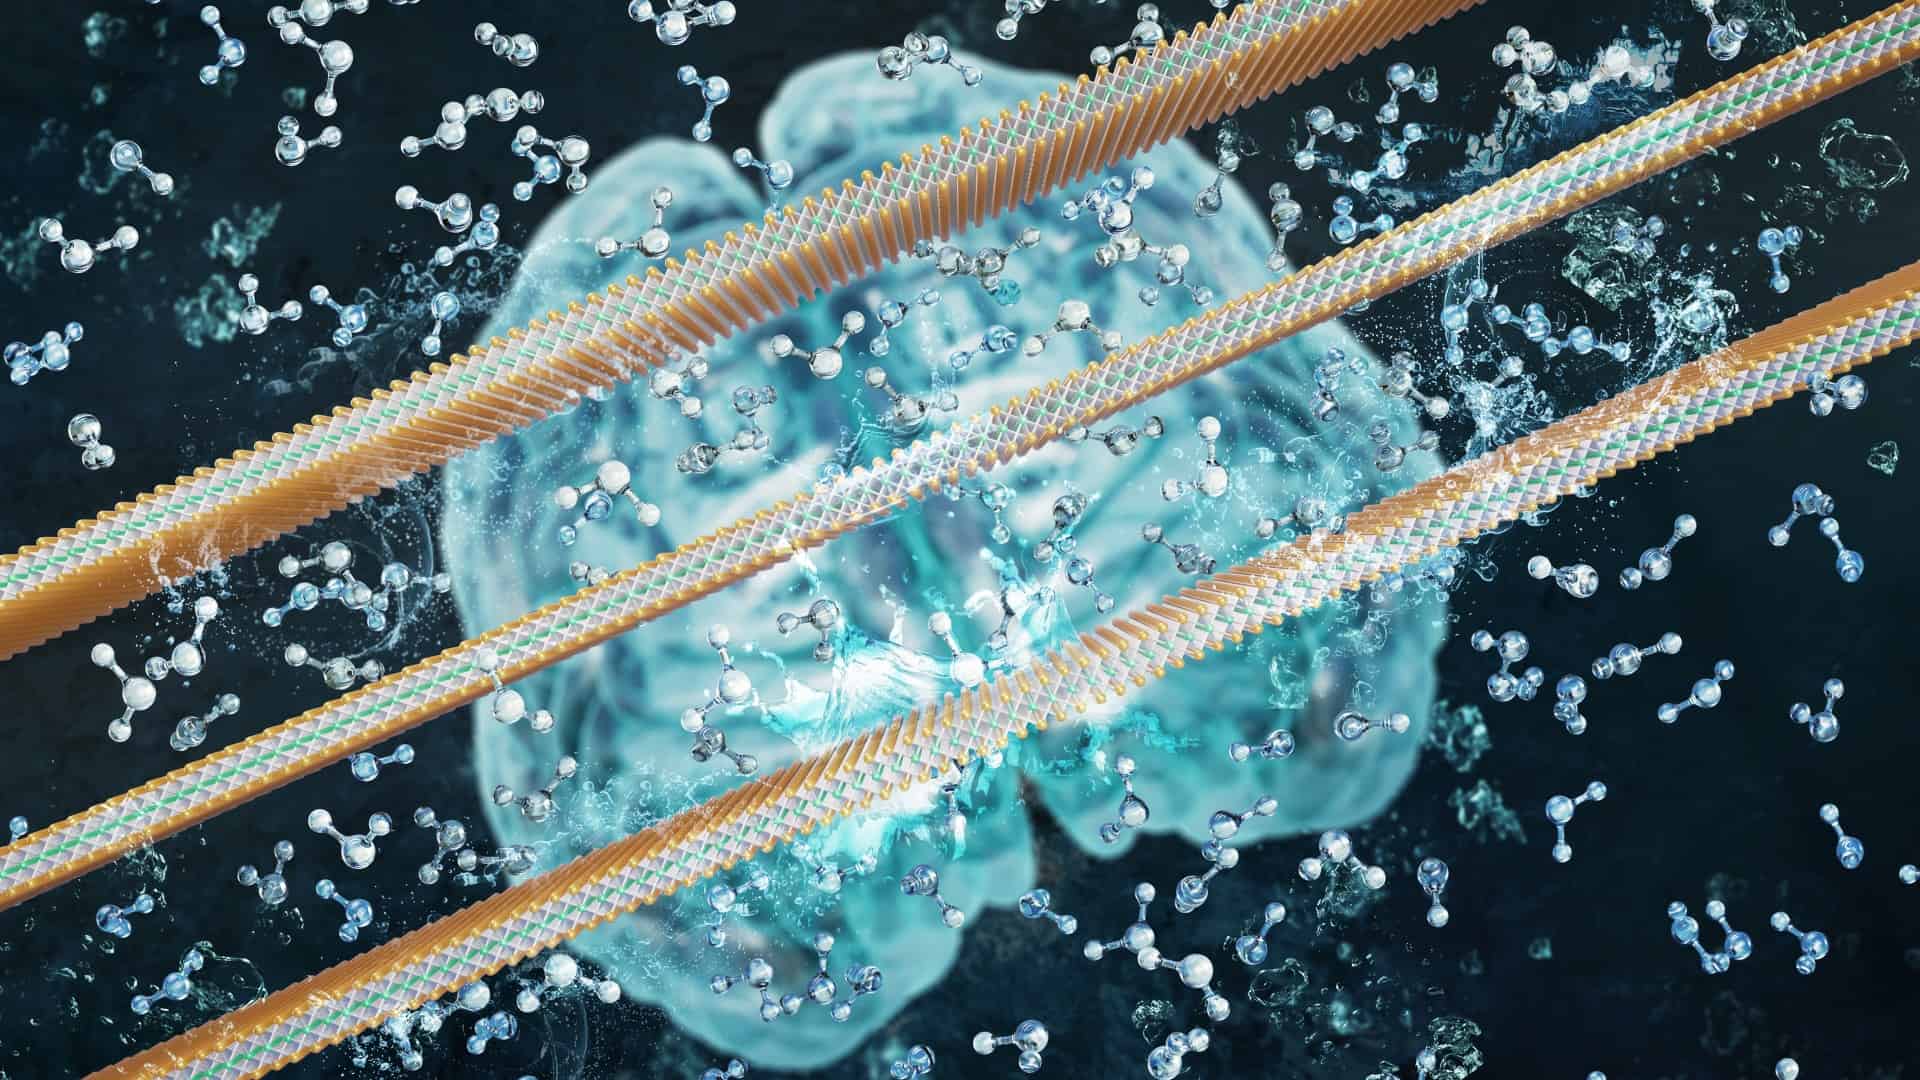 Intelligent membranes can help solve greatest global challenges, like clean water